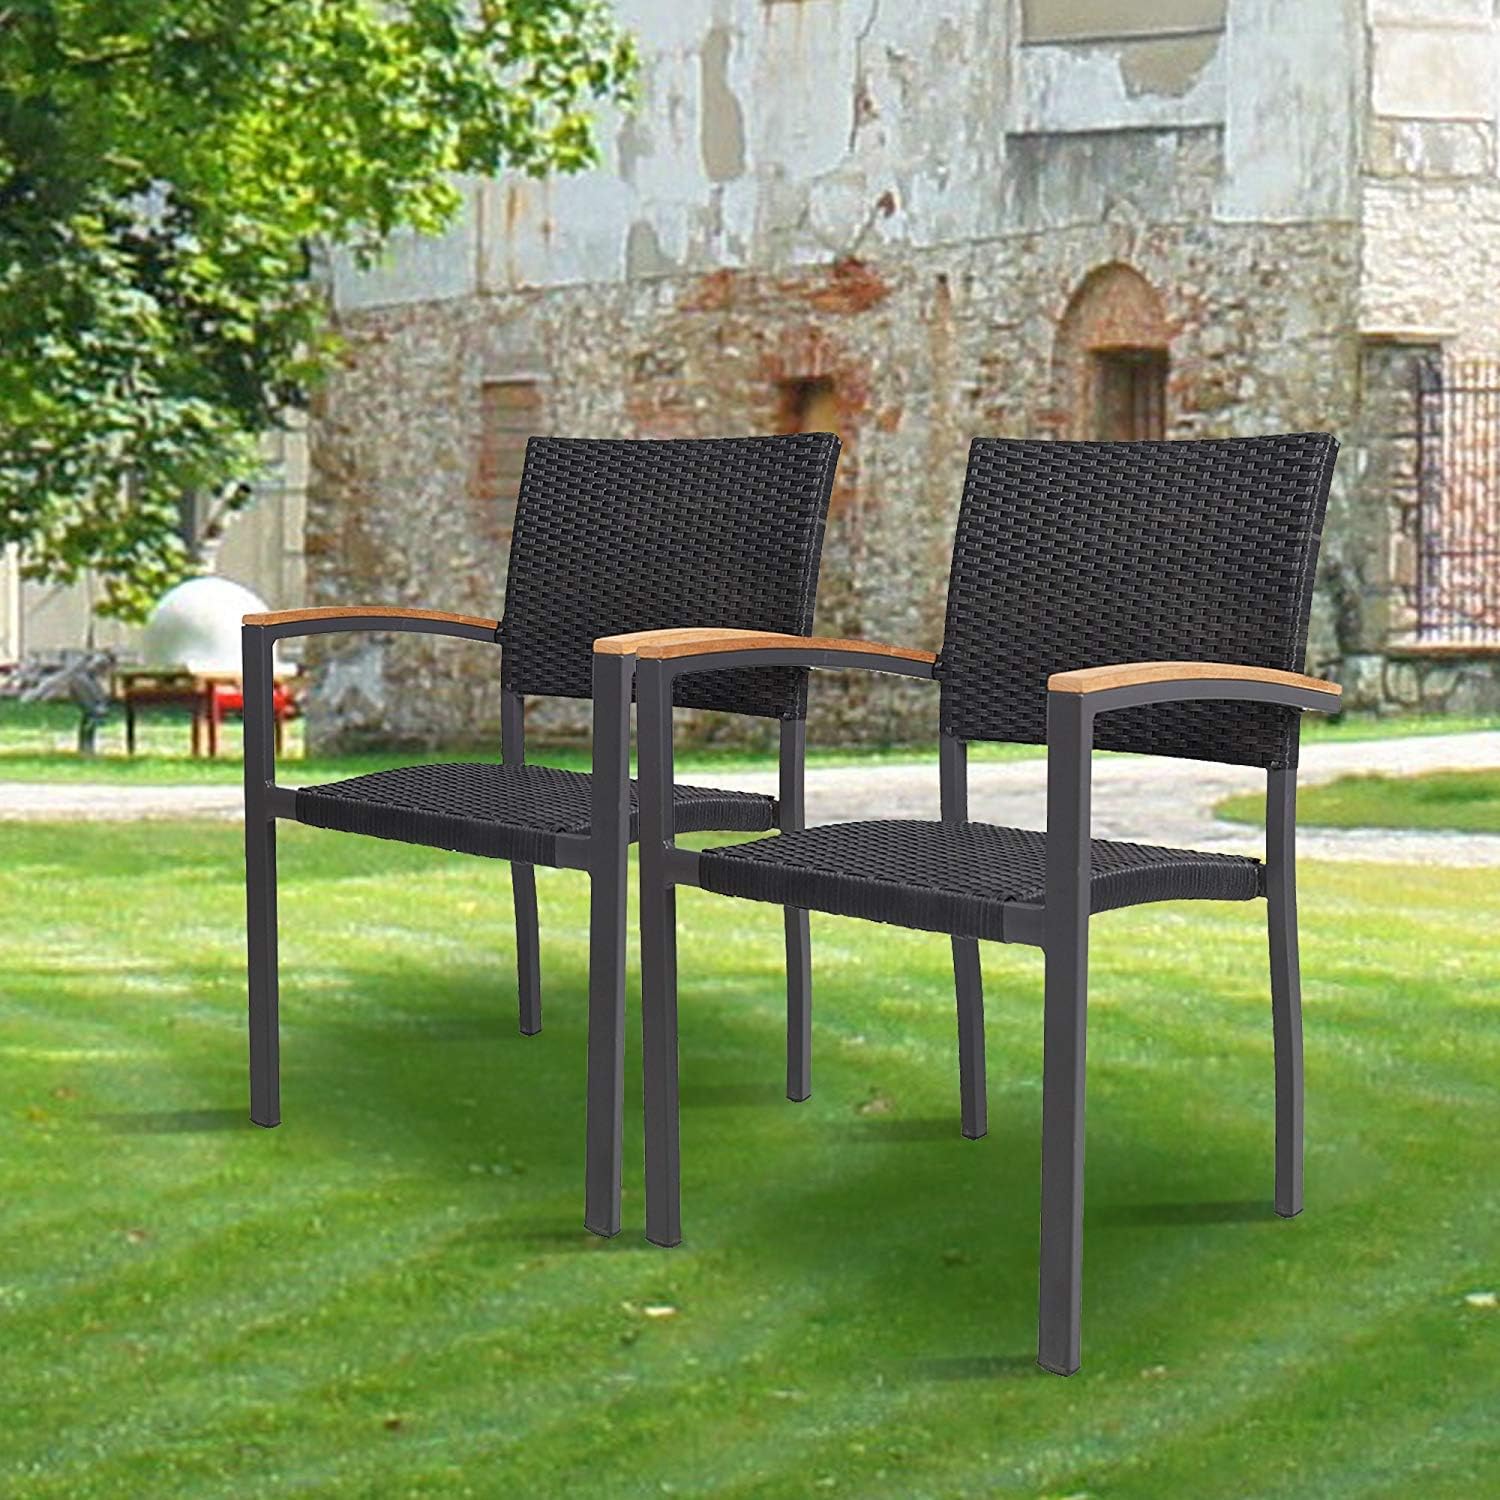 Set of 4 Patio Stackable Wicker Dining Chairs Outdoor Wicker Chairs with PE Rattan Aluminum Frame, Black